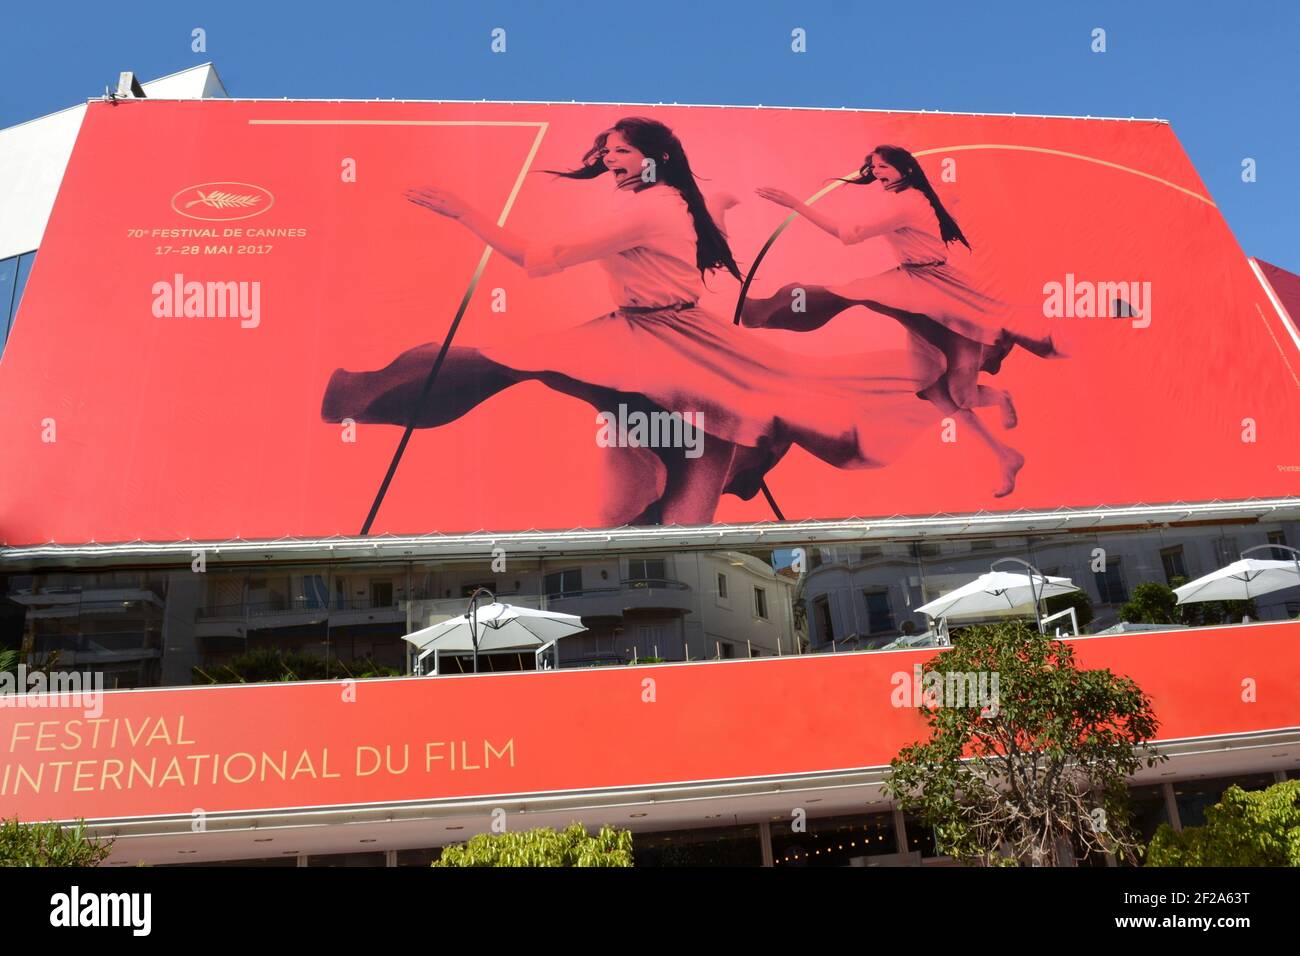 France, french riveira, Cannes, the official poster for the 70th International Film Festival, the artist chosen for this edition is Claudia CARDINALE. Stock Photo